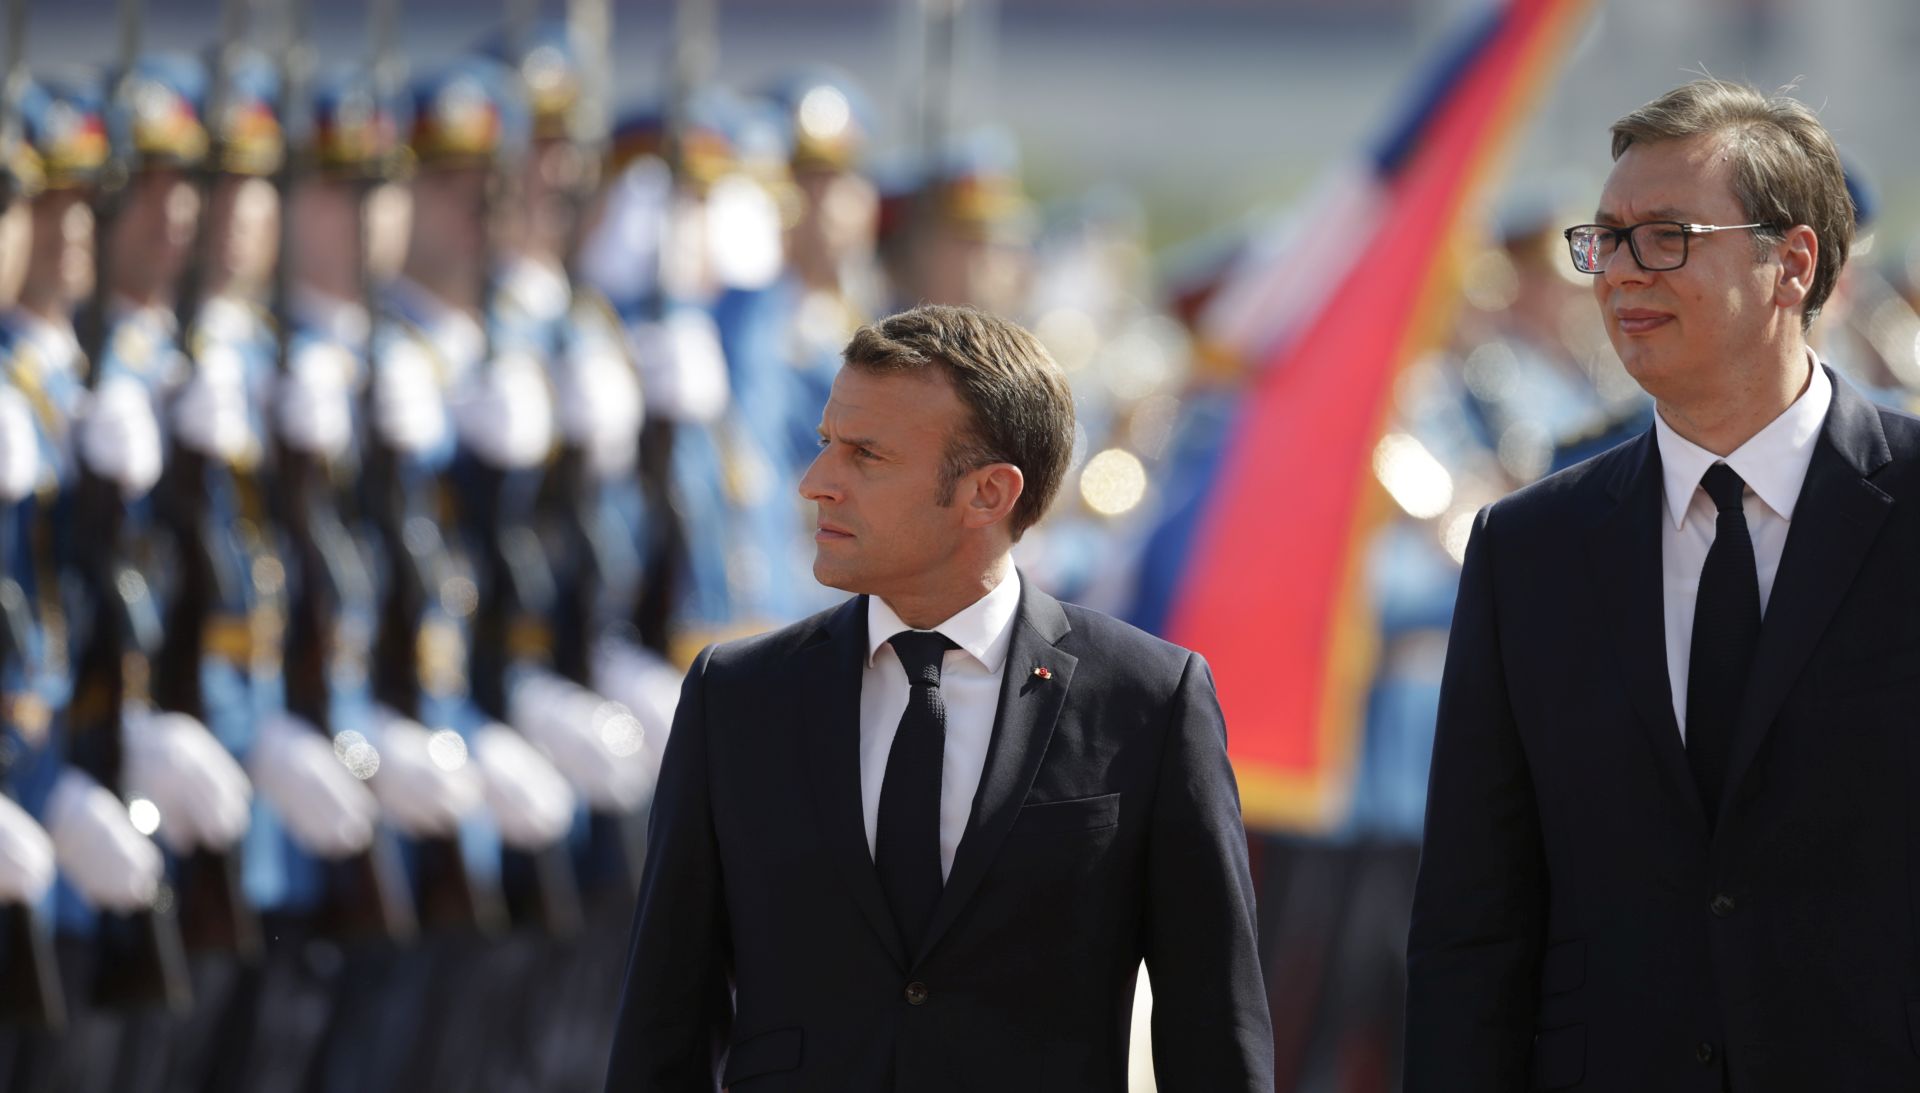 epa07718851 French President Emmanuel Macron (L) inspects the guard of honour with Serbian President Aleksandar Vucic (R) in Belgrade, Serbia, 15 July 2019. President Macron is on a two-day state visit to Serbia.  EPA/ANDREJ CUKIC